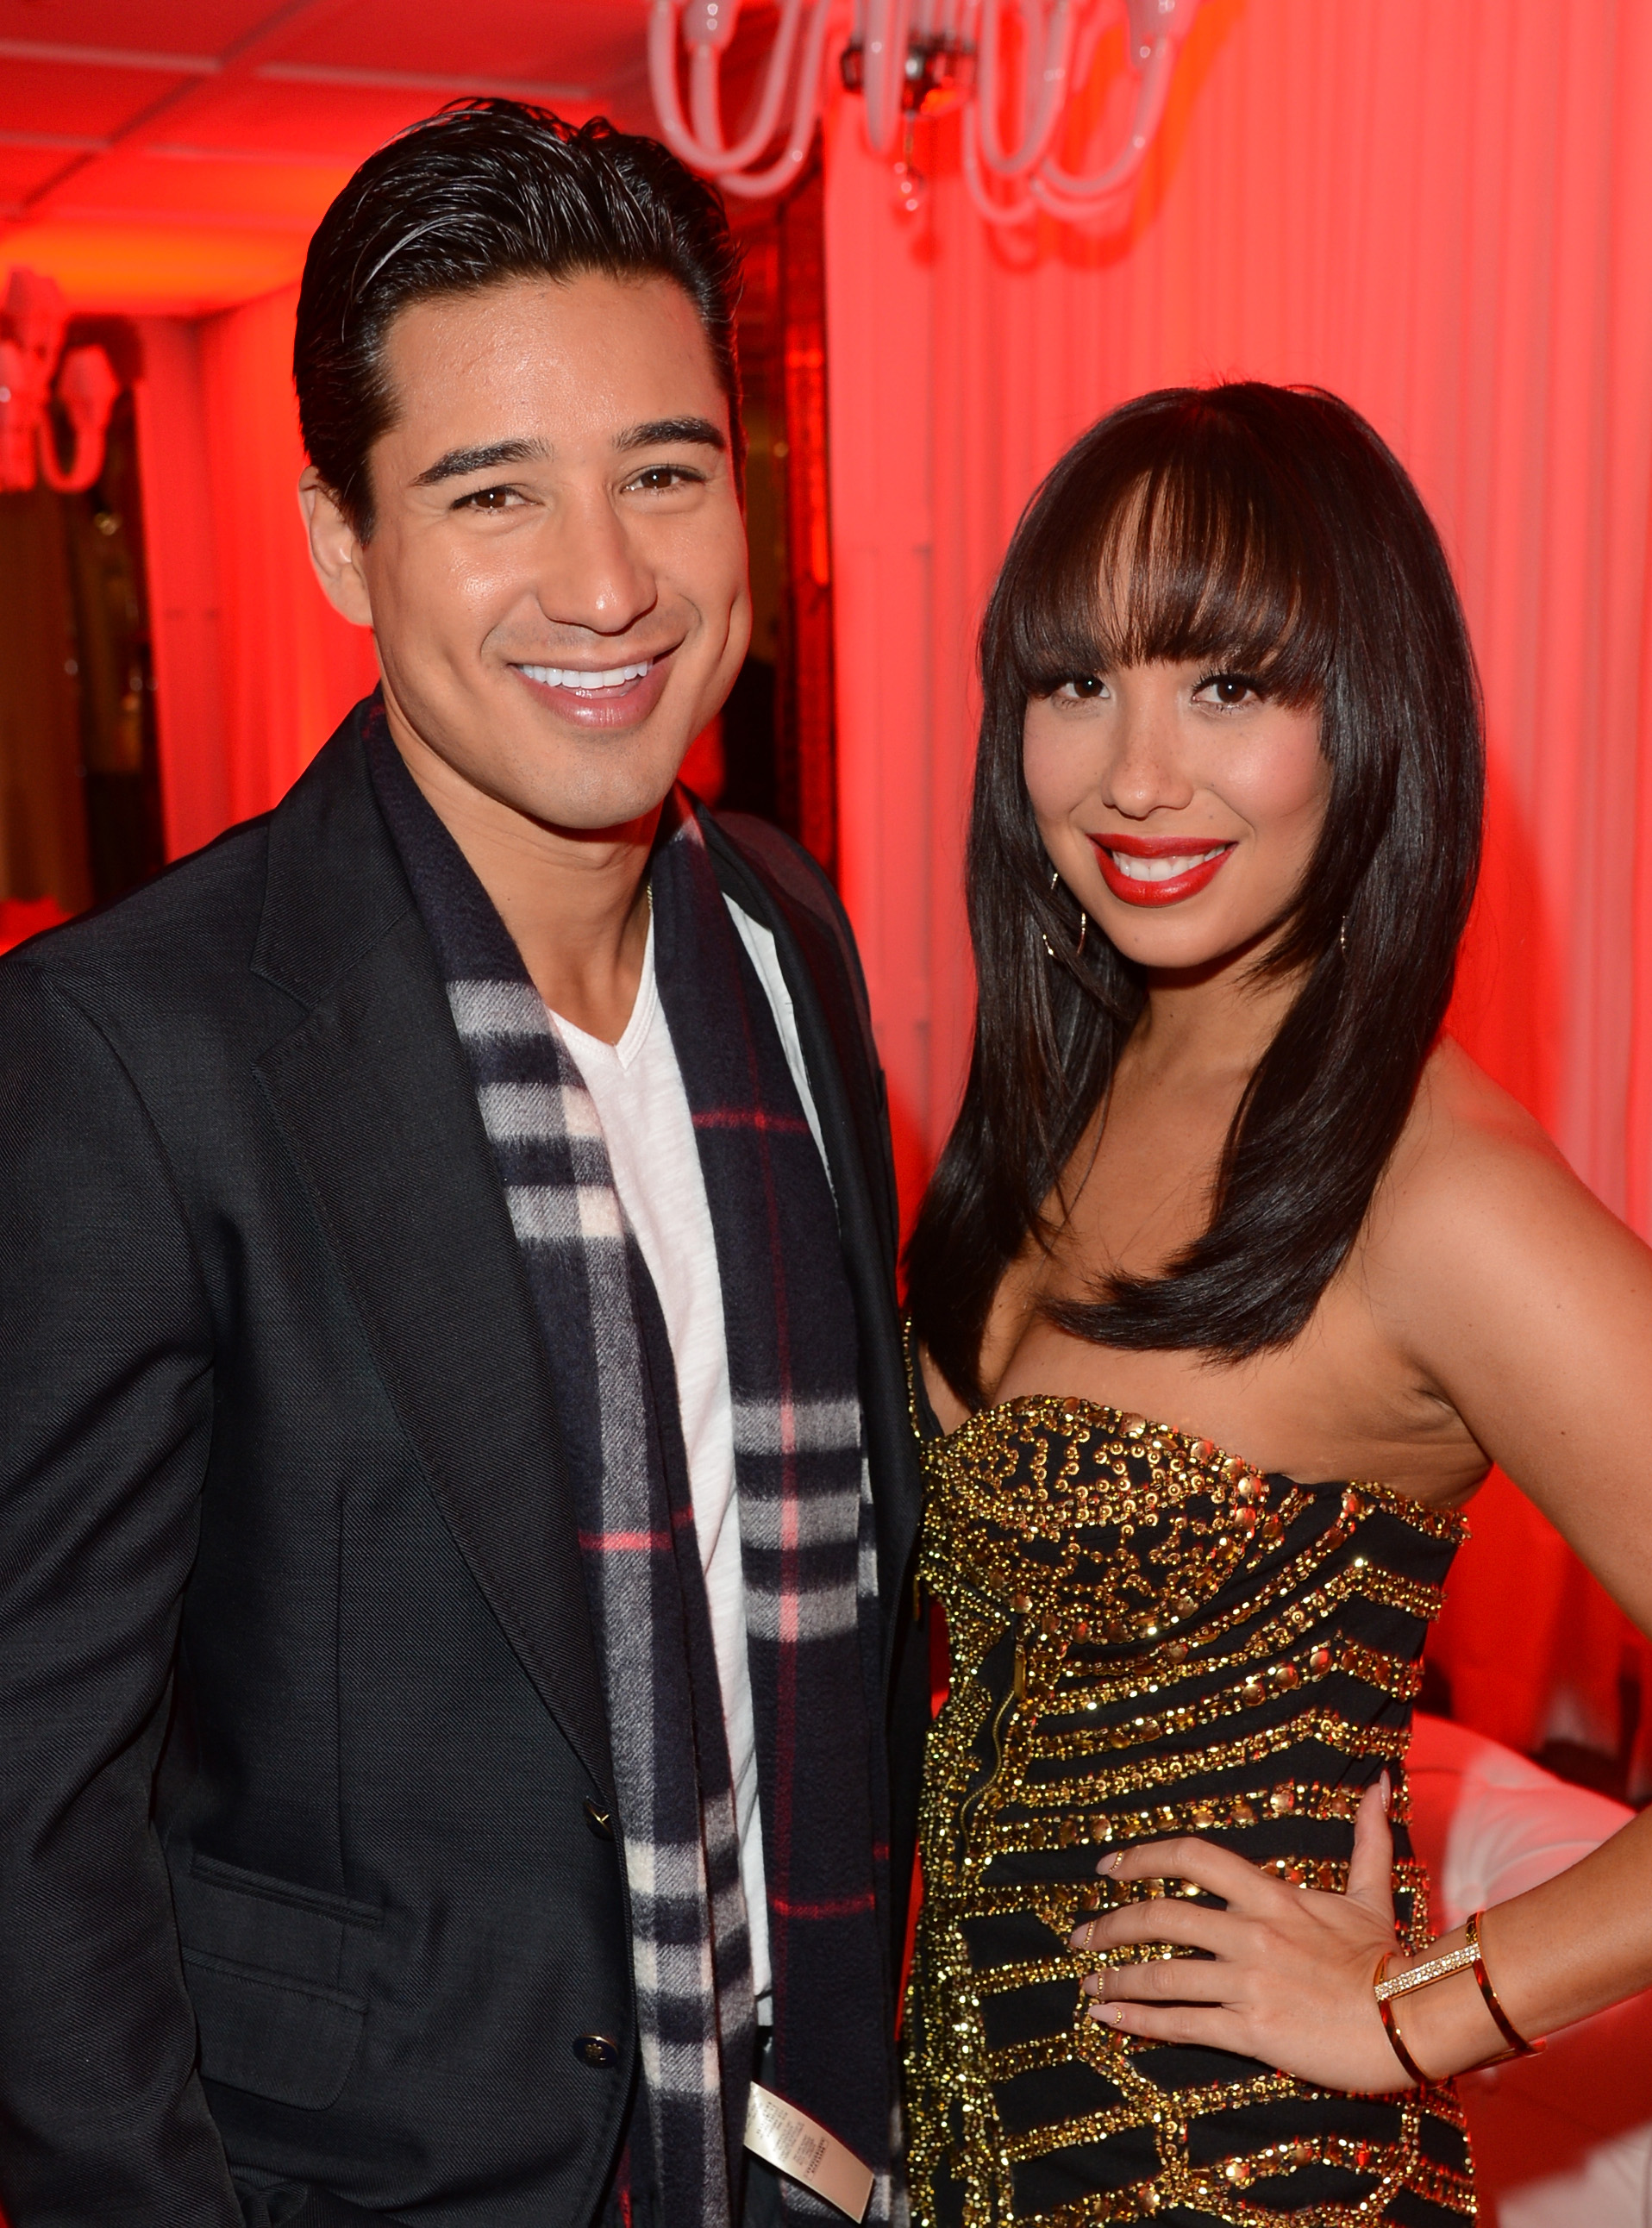 BEVERLY HILLS, CA - FEBRUARY 07:  TV personality Mario Lopez and dancer Cheryl Burke attend Quattro Volte Vodka Preview with Taio Cruz at SLS Hotel on February 7, 2013 in Beverly Hills, California.  (Photo by Jason Merritt/WireImage)